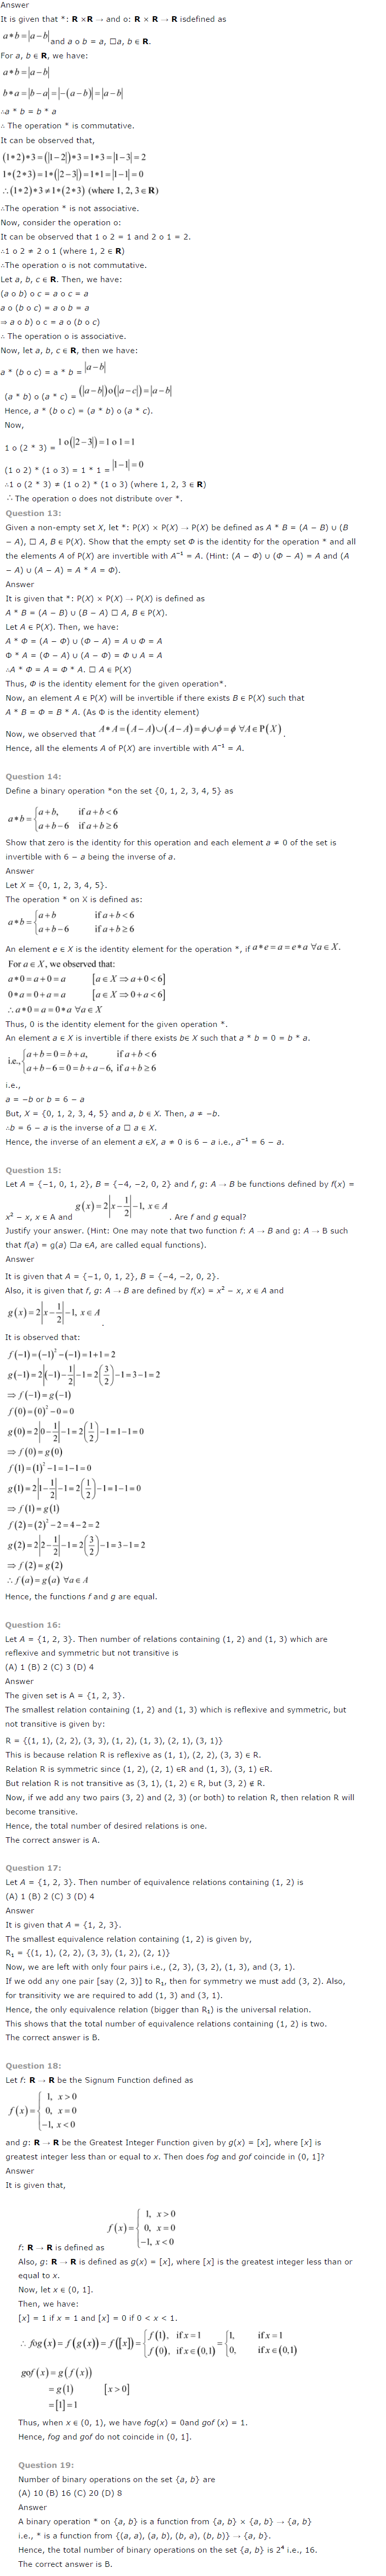 NCERT Solutions For Class 12 Maths Chapter 1 Relations and Functions 12